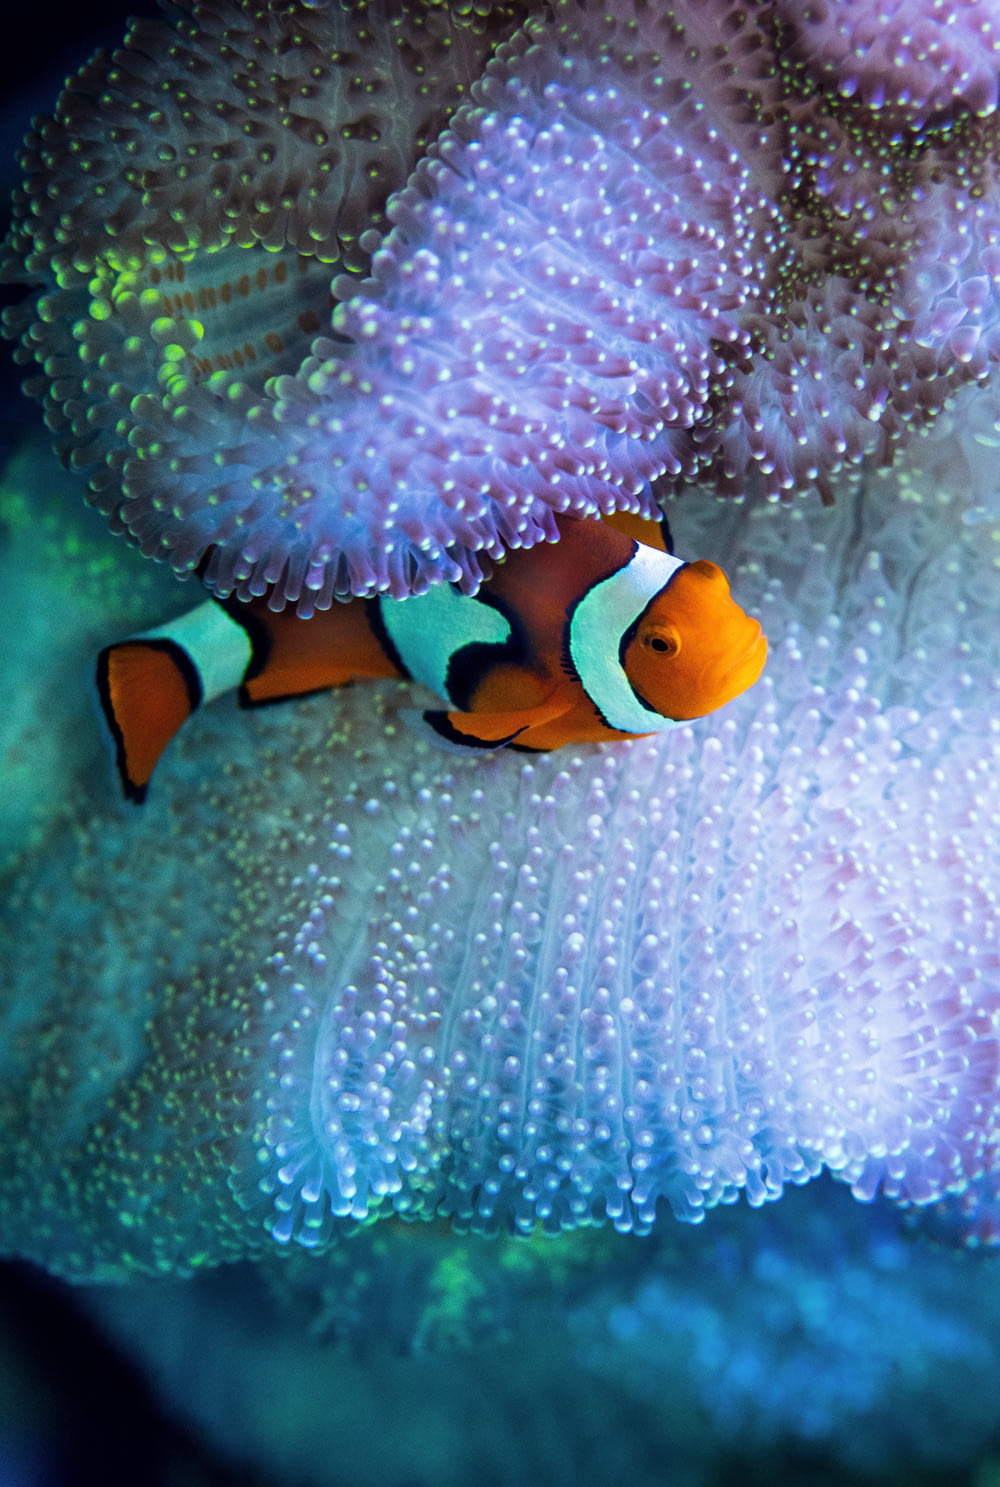 clown fish in water during daytime